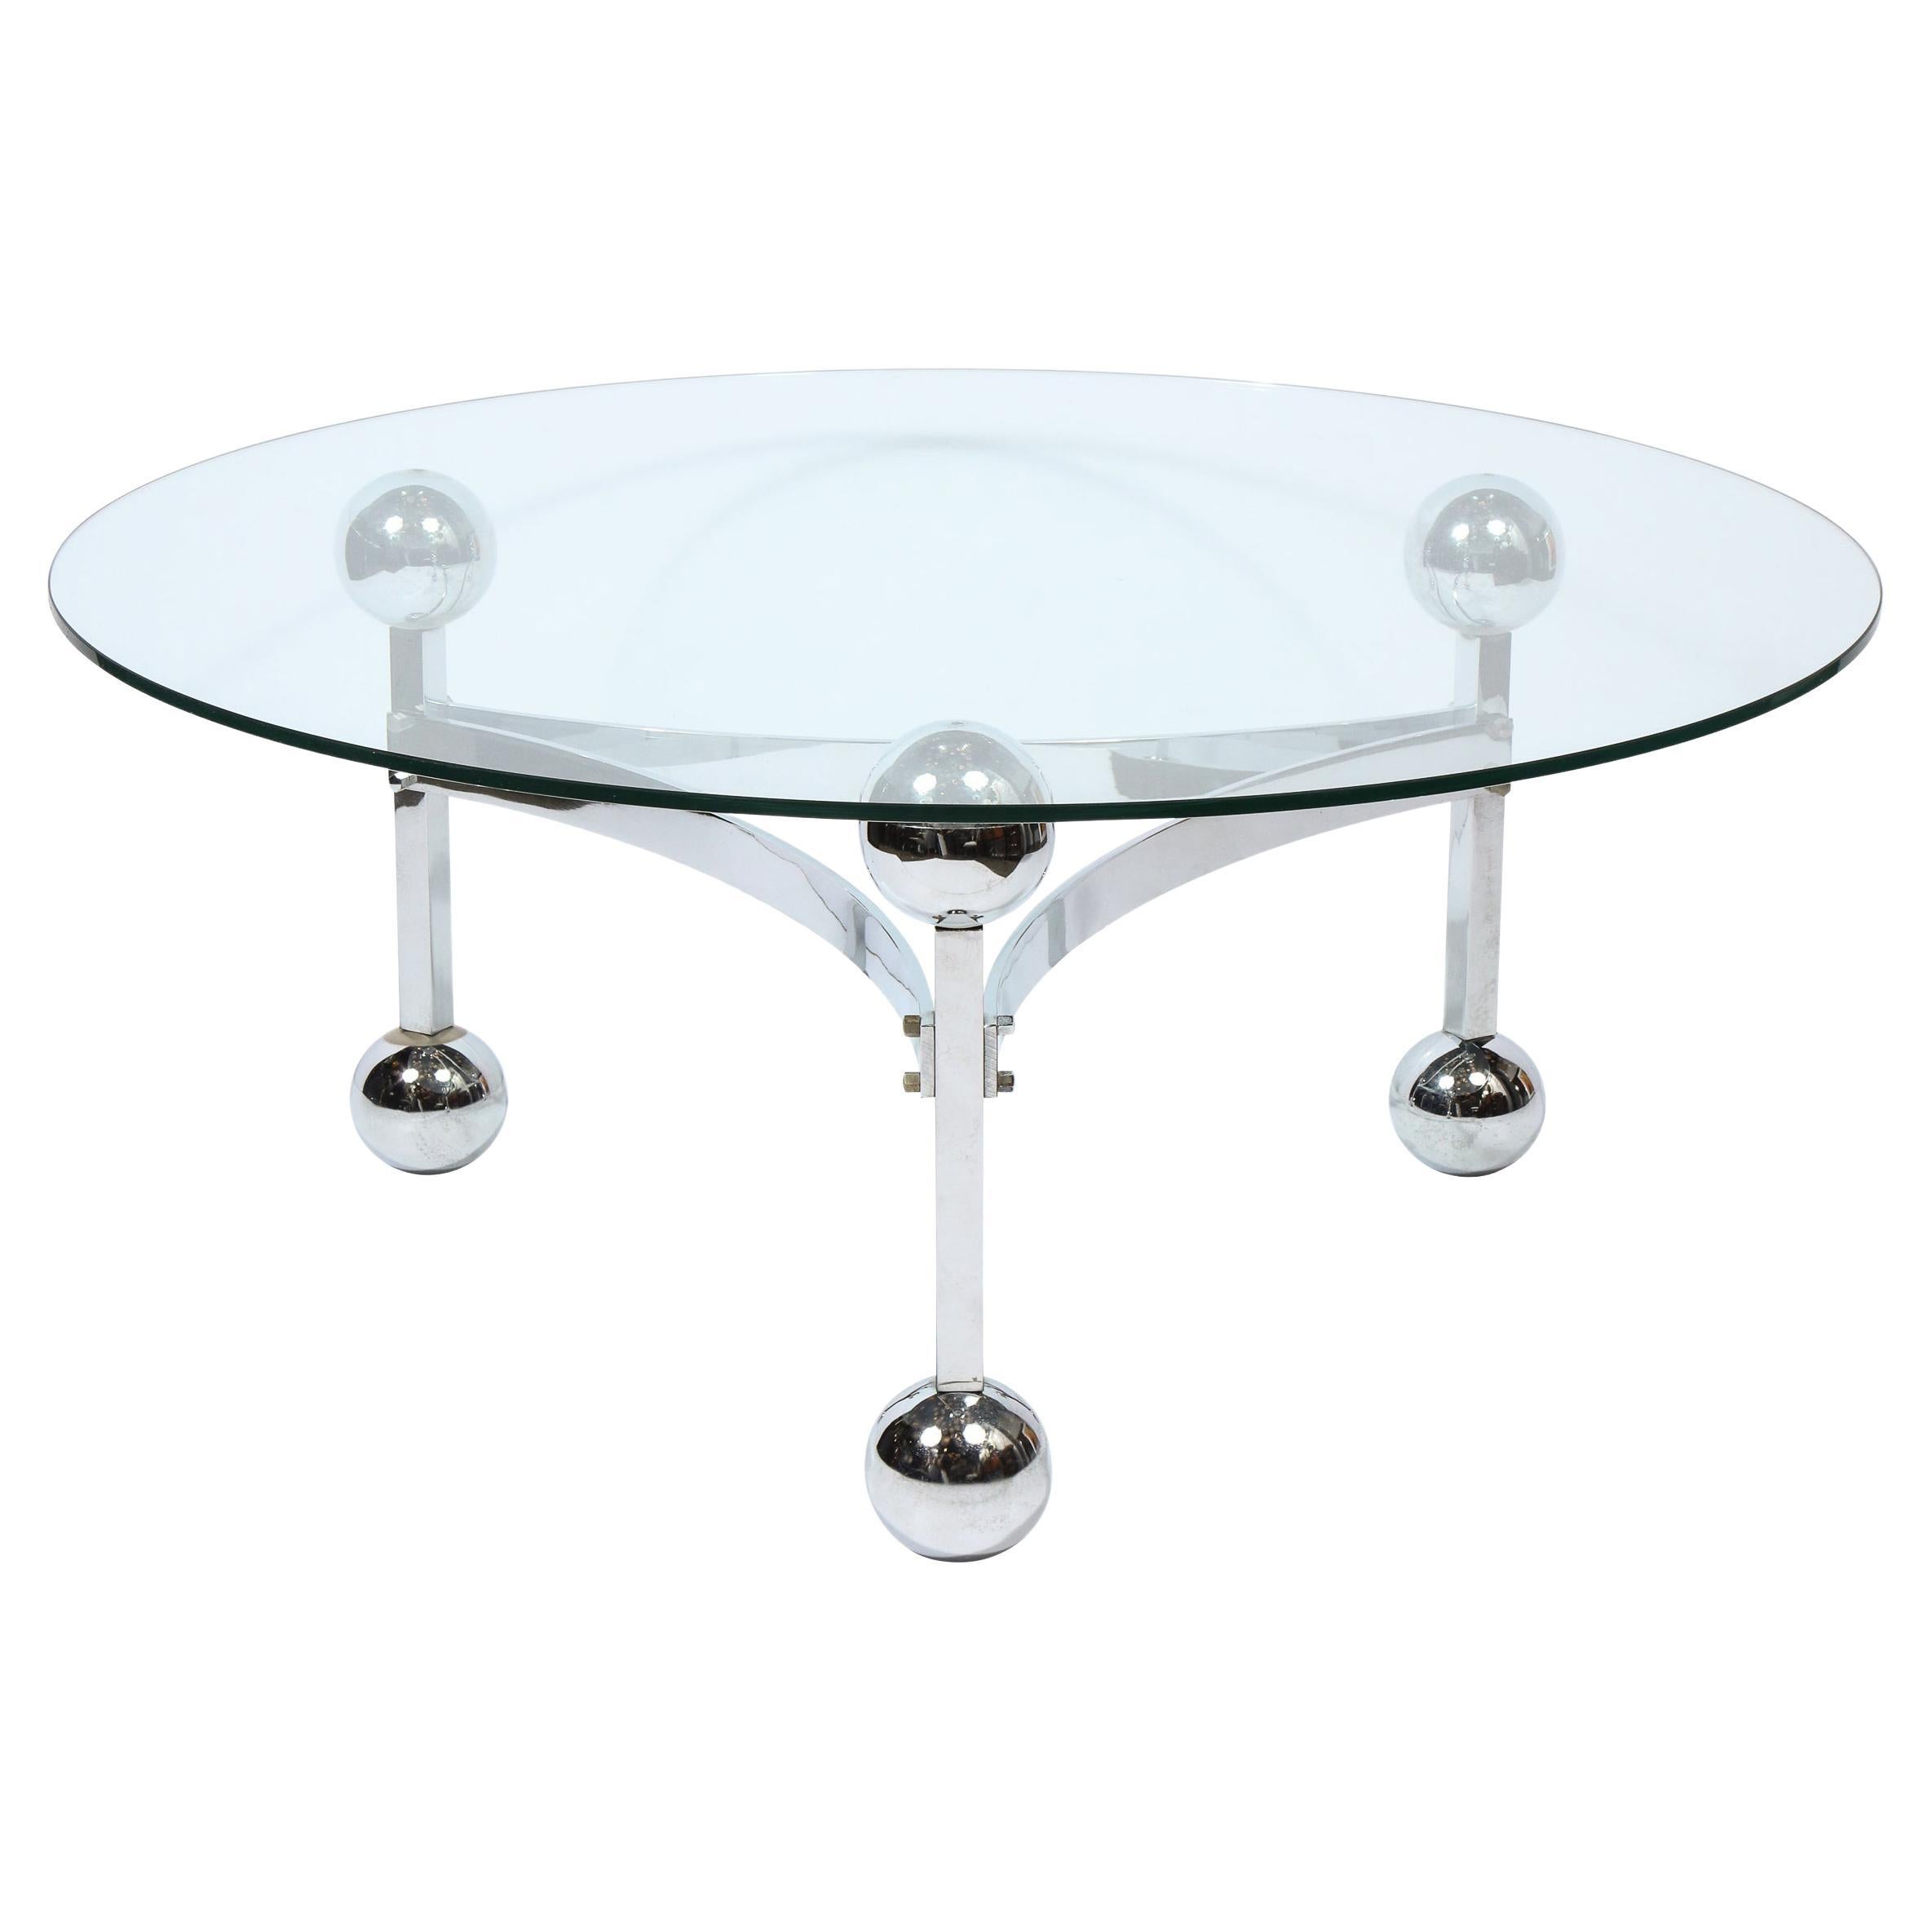 Mid-Century Modern Polished Chrome & Glass Cocktail with Spherical Detailing